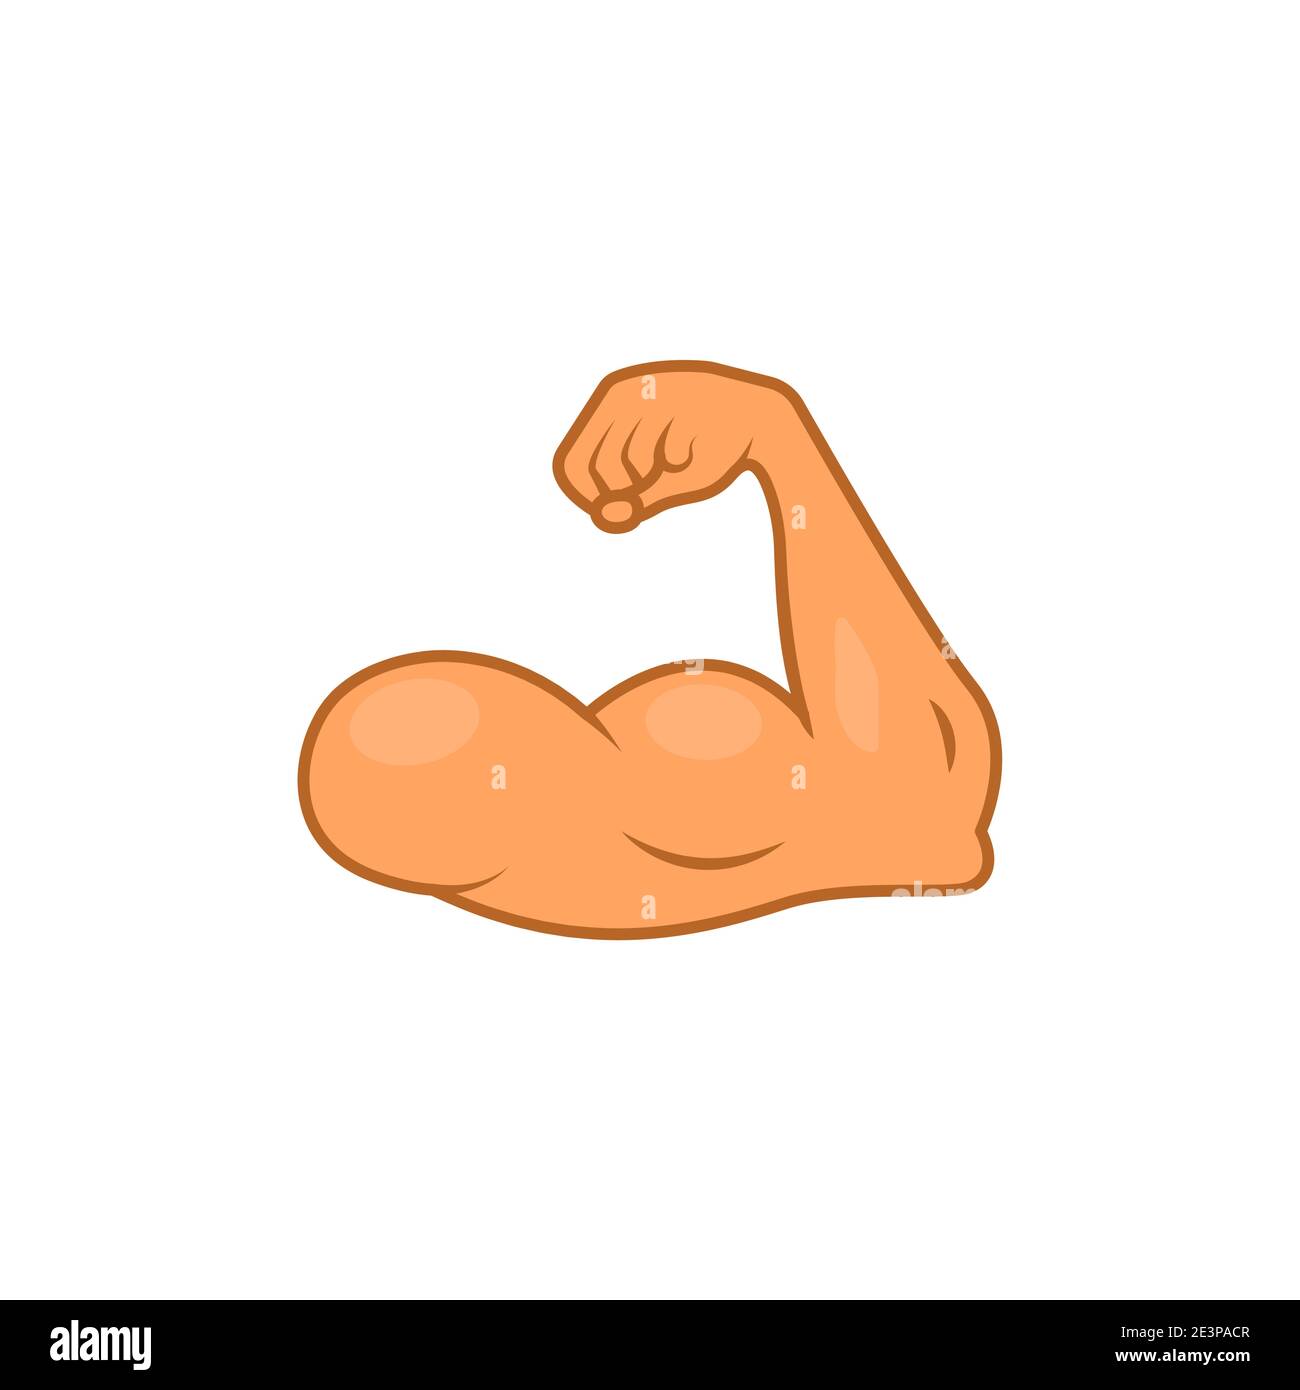 Biceps Icon. Strong Arm Muscle. Athletic Graphic by onyxproj